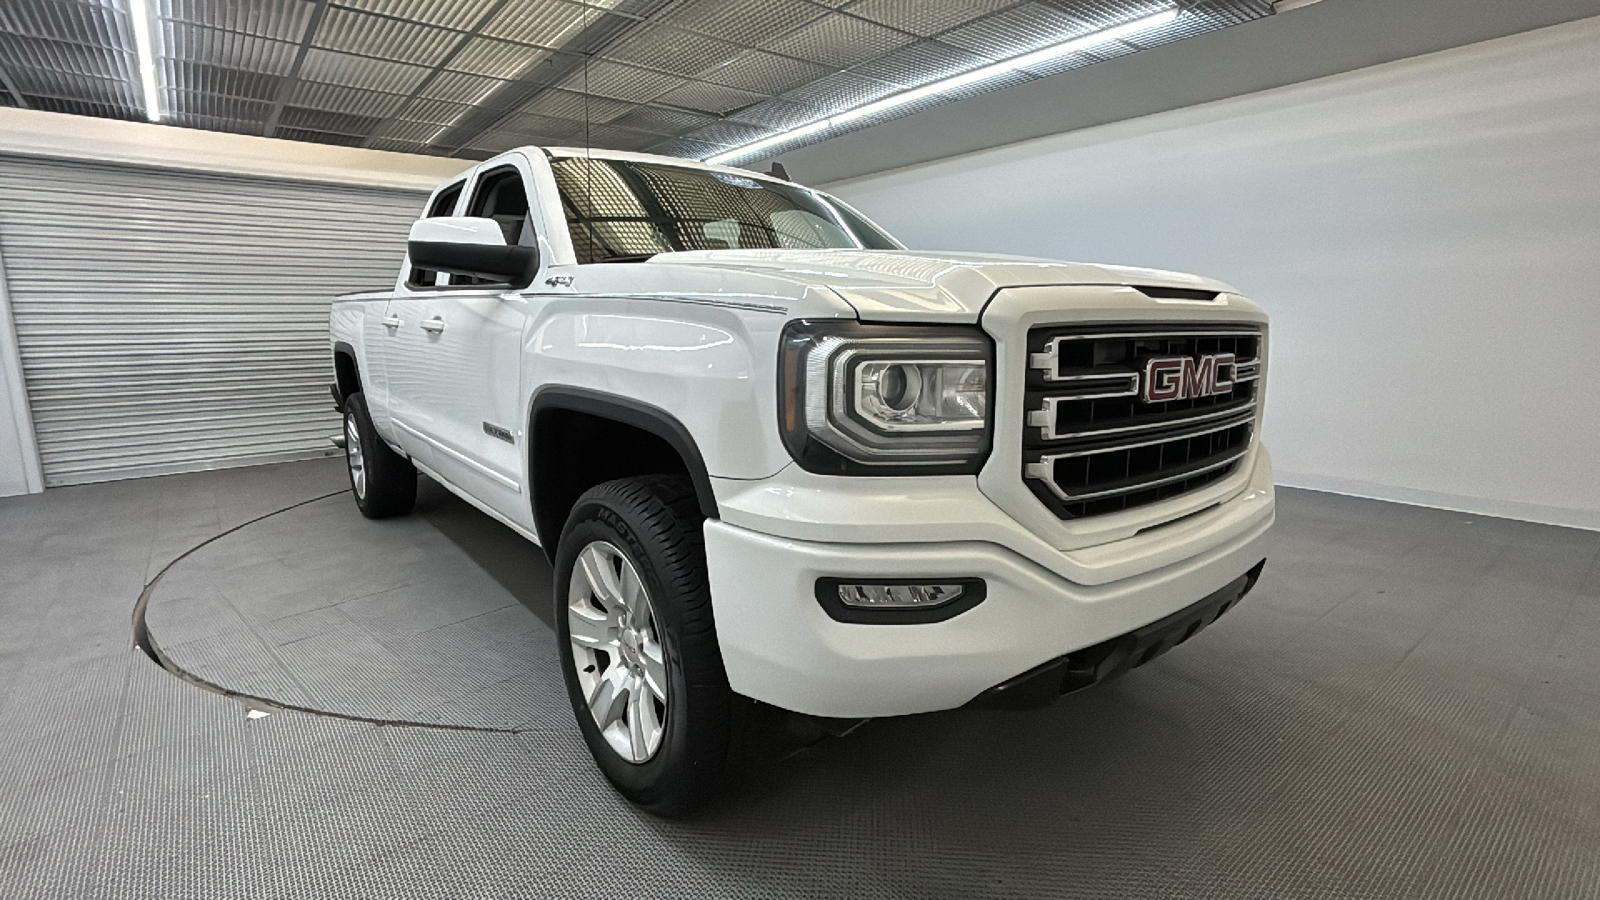 Car Connection Superstore - Used GMC SIERRA-1500 2016 CAR CONNECTION INC. 